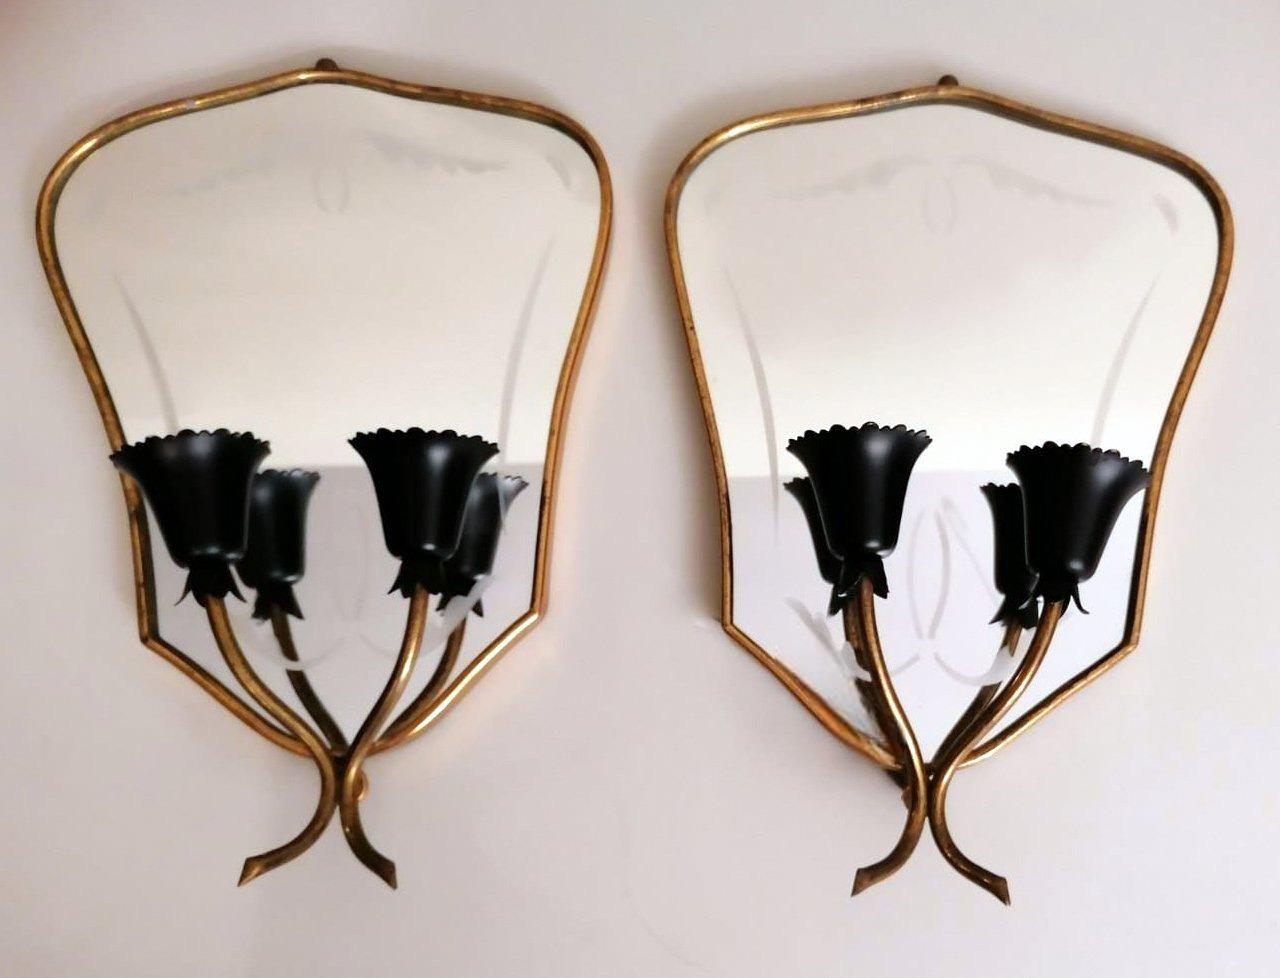 We kindly suggest you read the whole description, because with it we try to give you detailed technical and historical information to guarantee the authenticity of our objects.
Graceful and elegant pair of Italian wall sconces; each consists of a